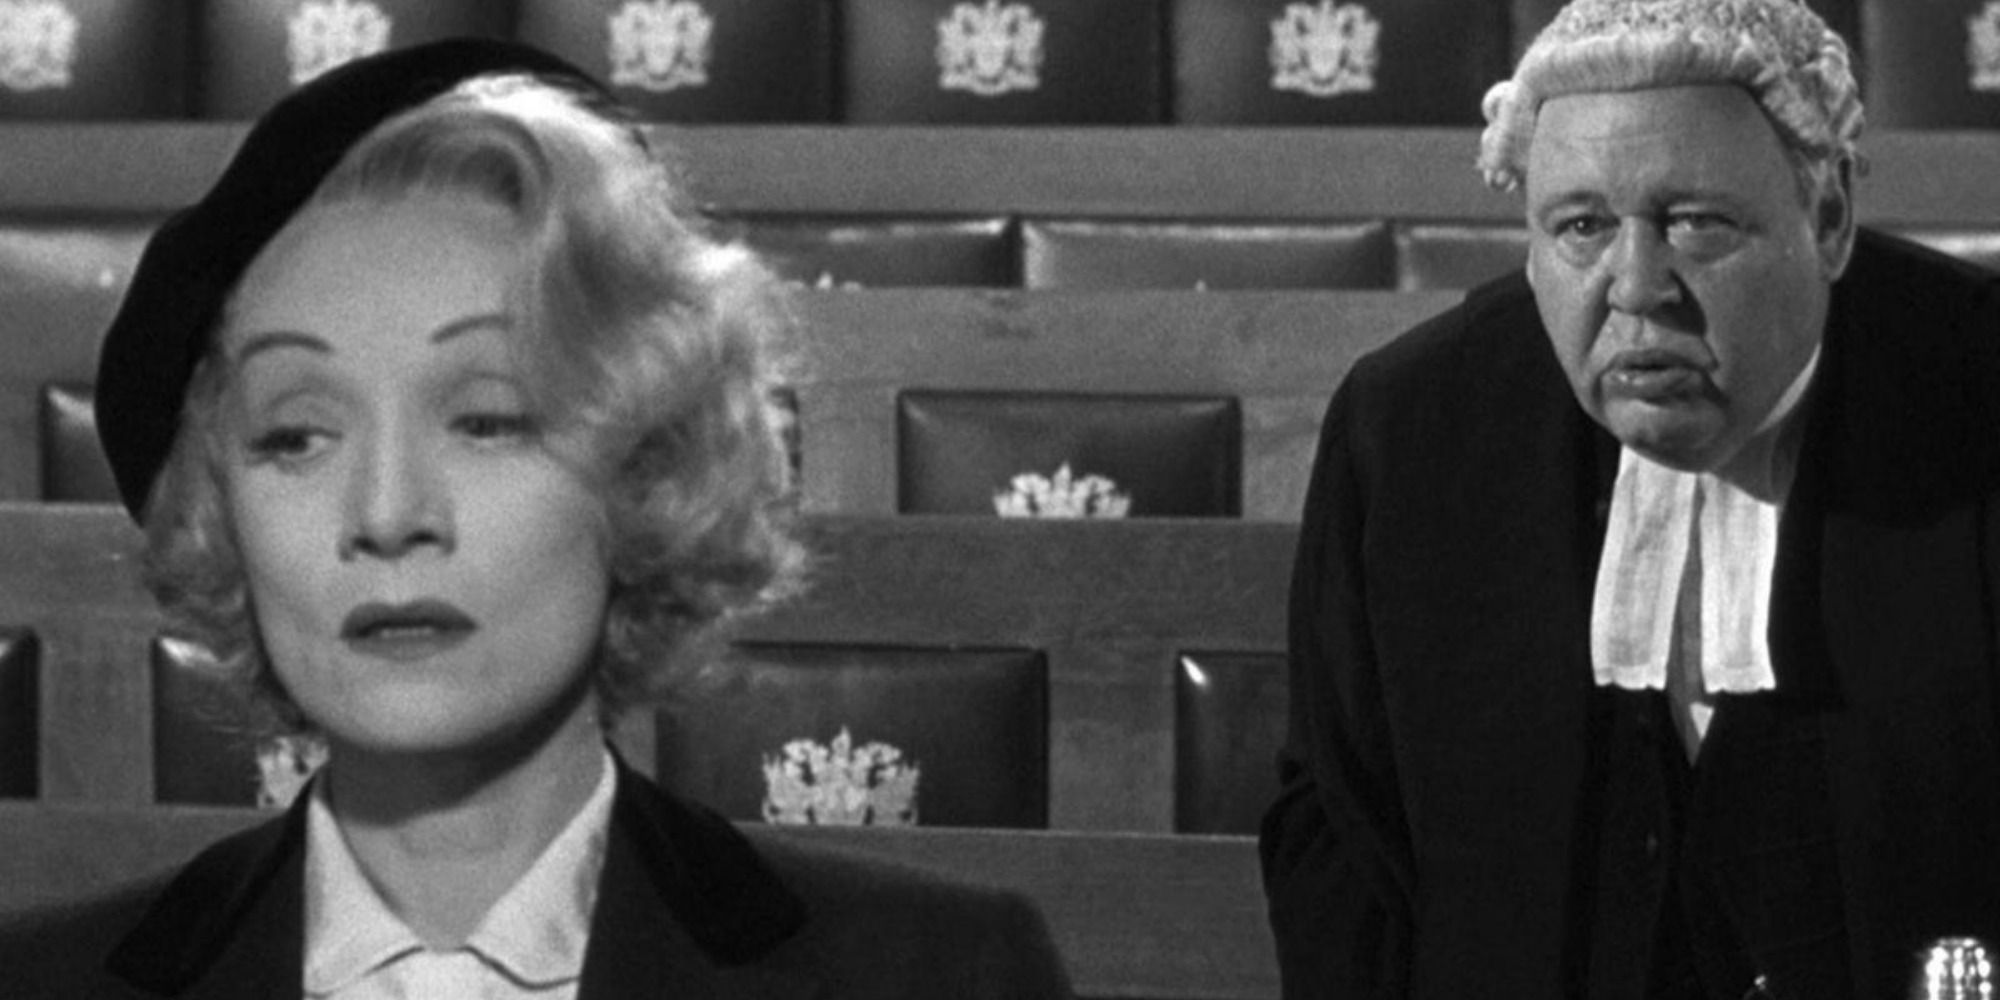 Marlene Dietrich as Christine VOle crying while a judge stands behind her in Witness for the Prosecution